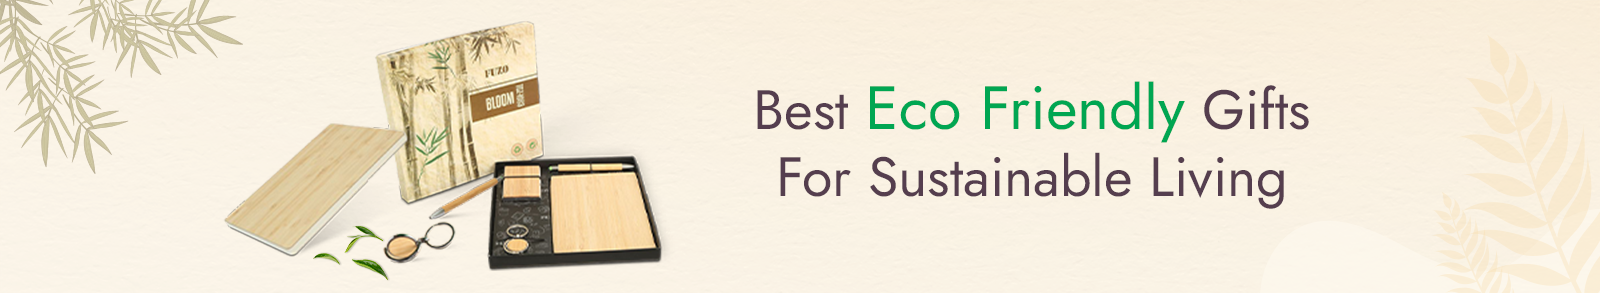 Best Eco Friendly Gifts For Sustainable Living_1600